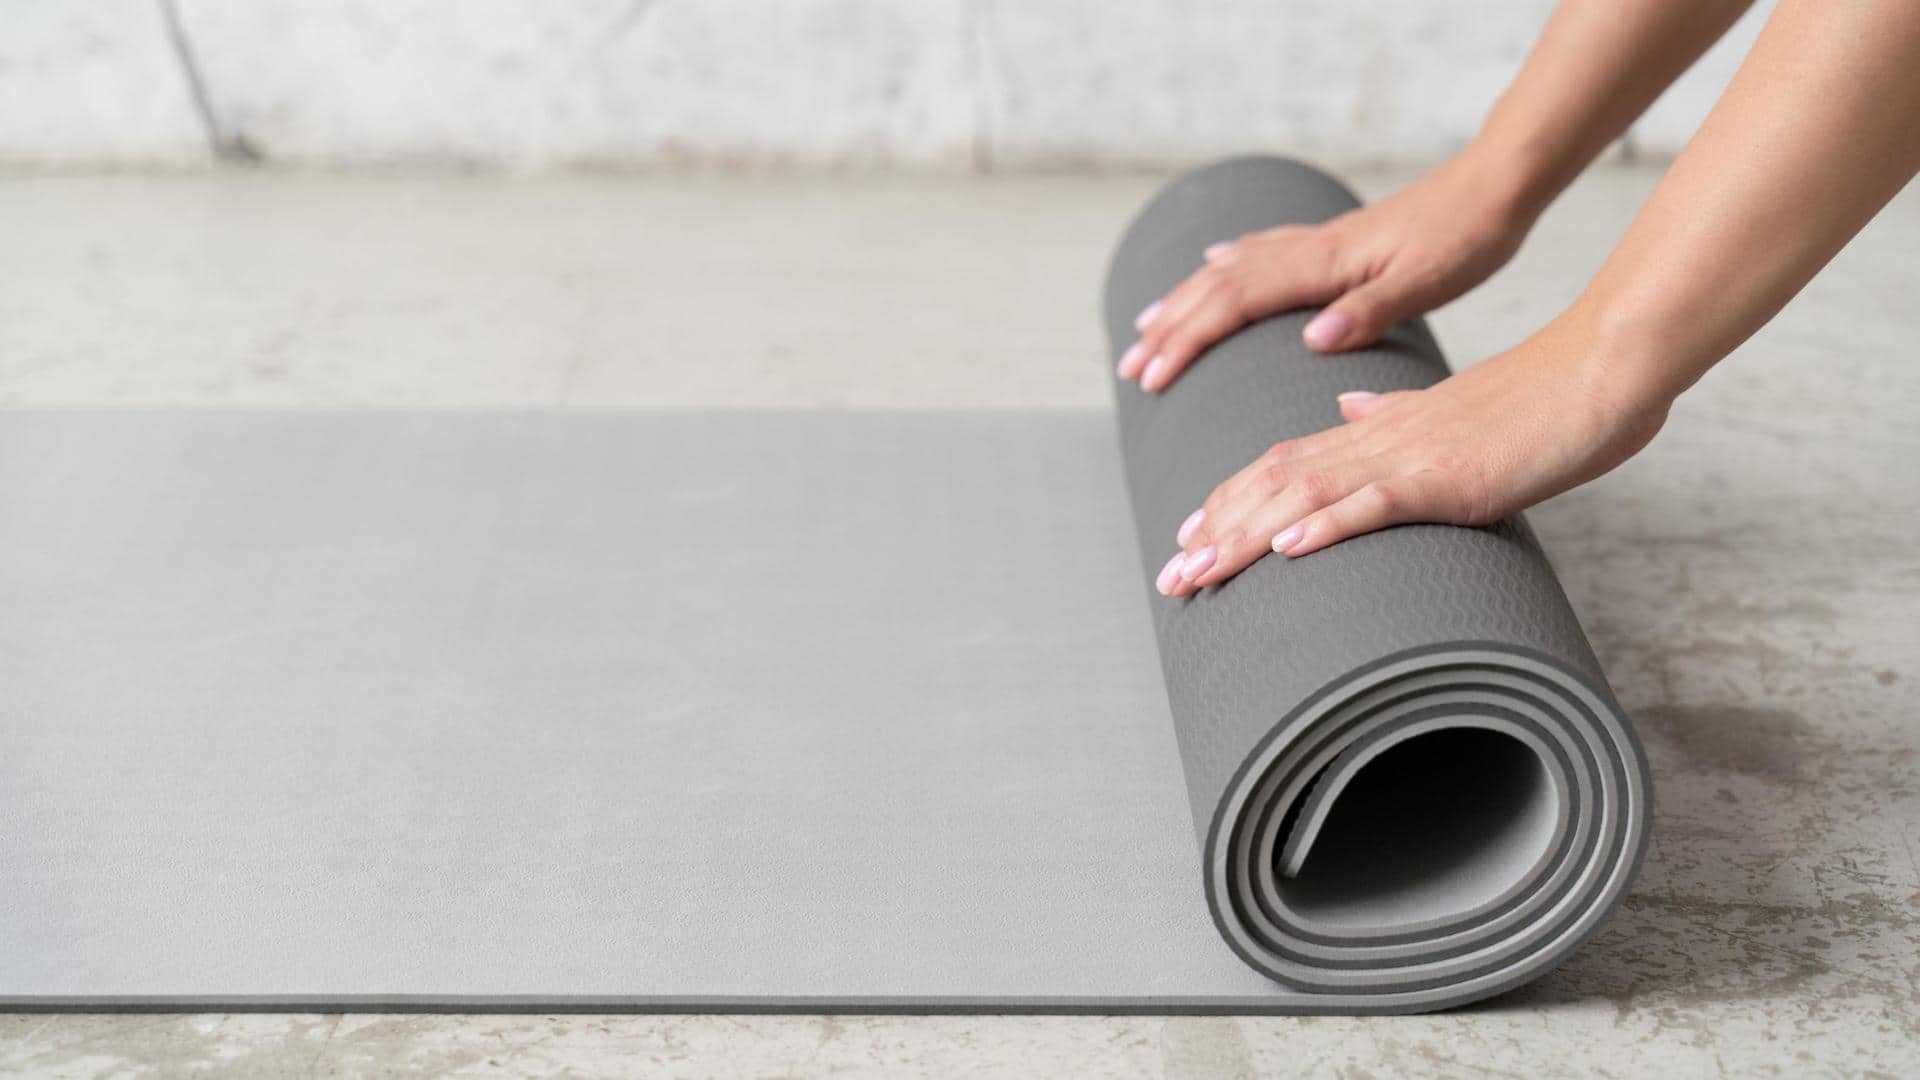 New to yoga? Start with these simple asanas